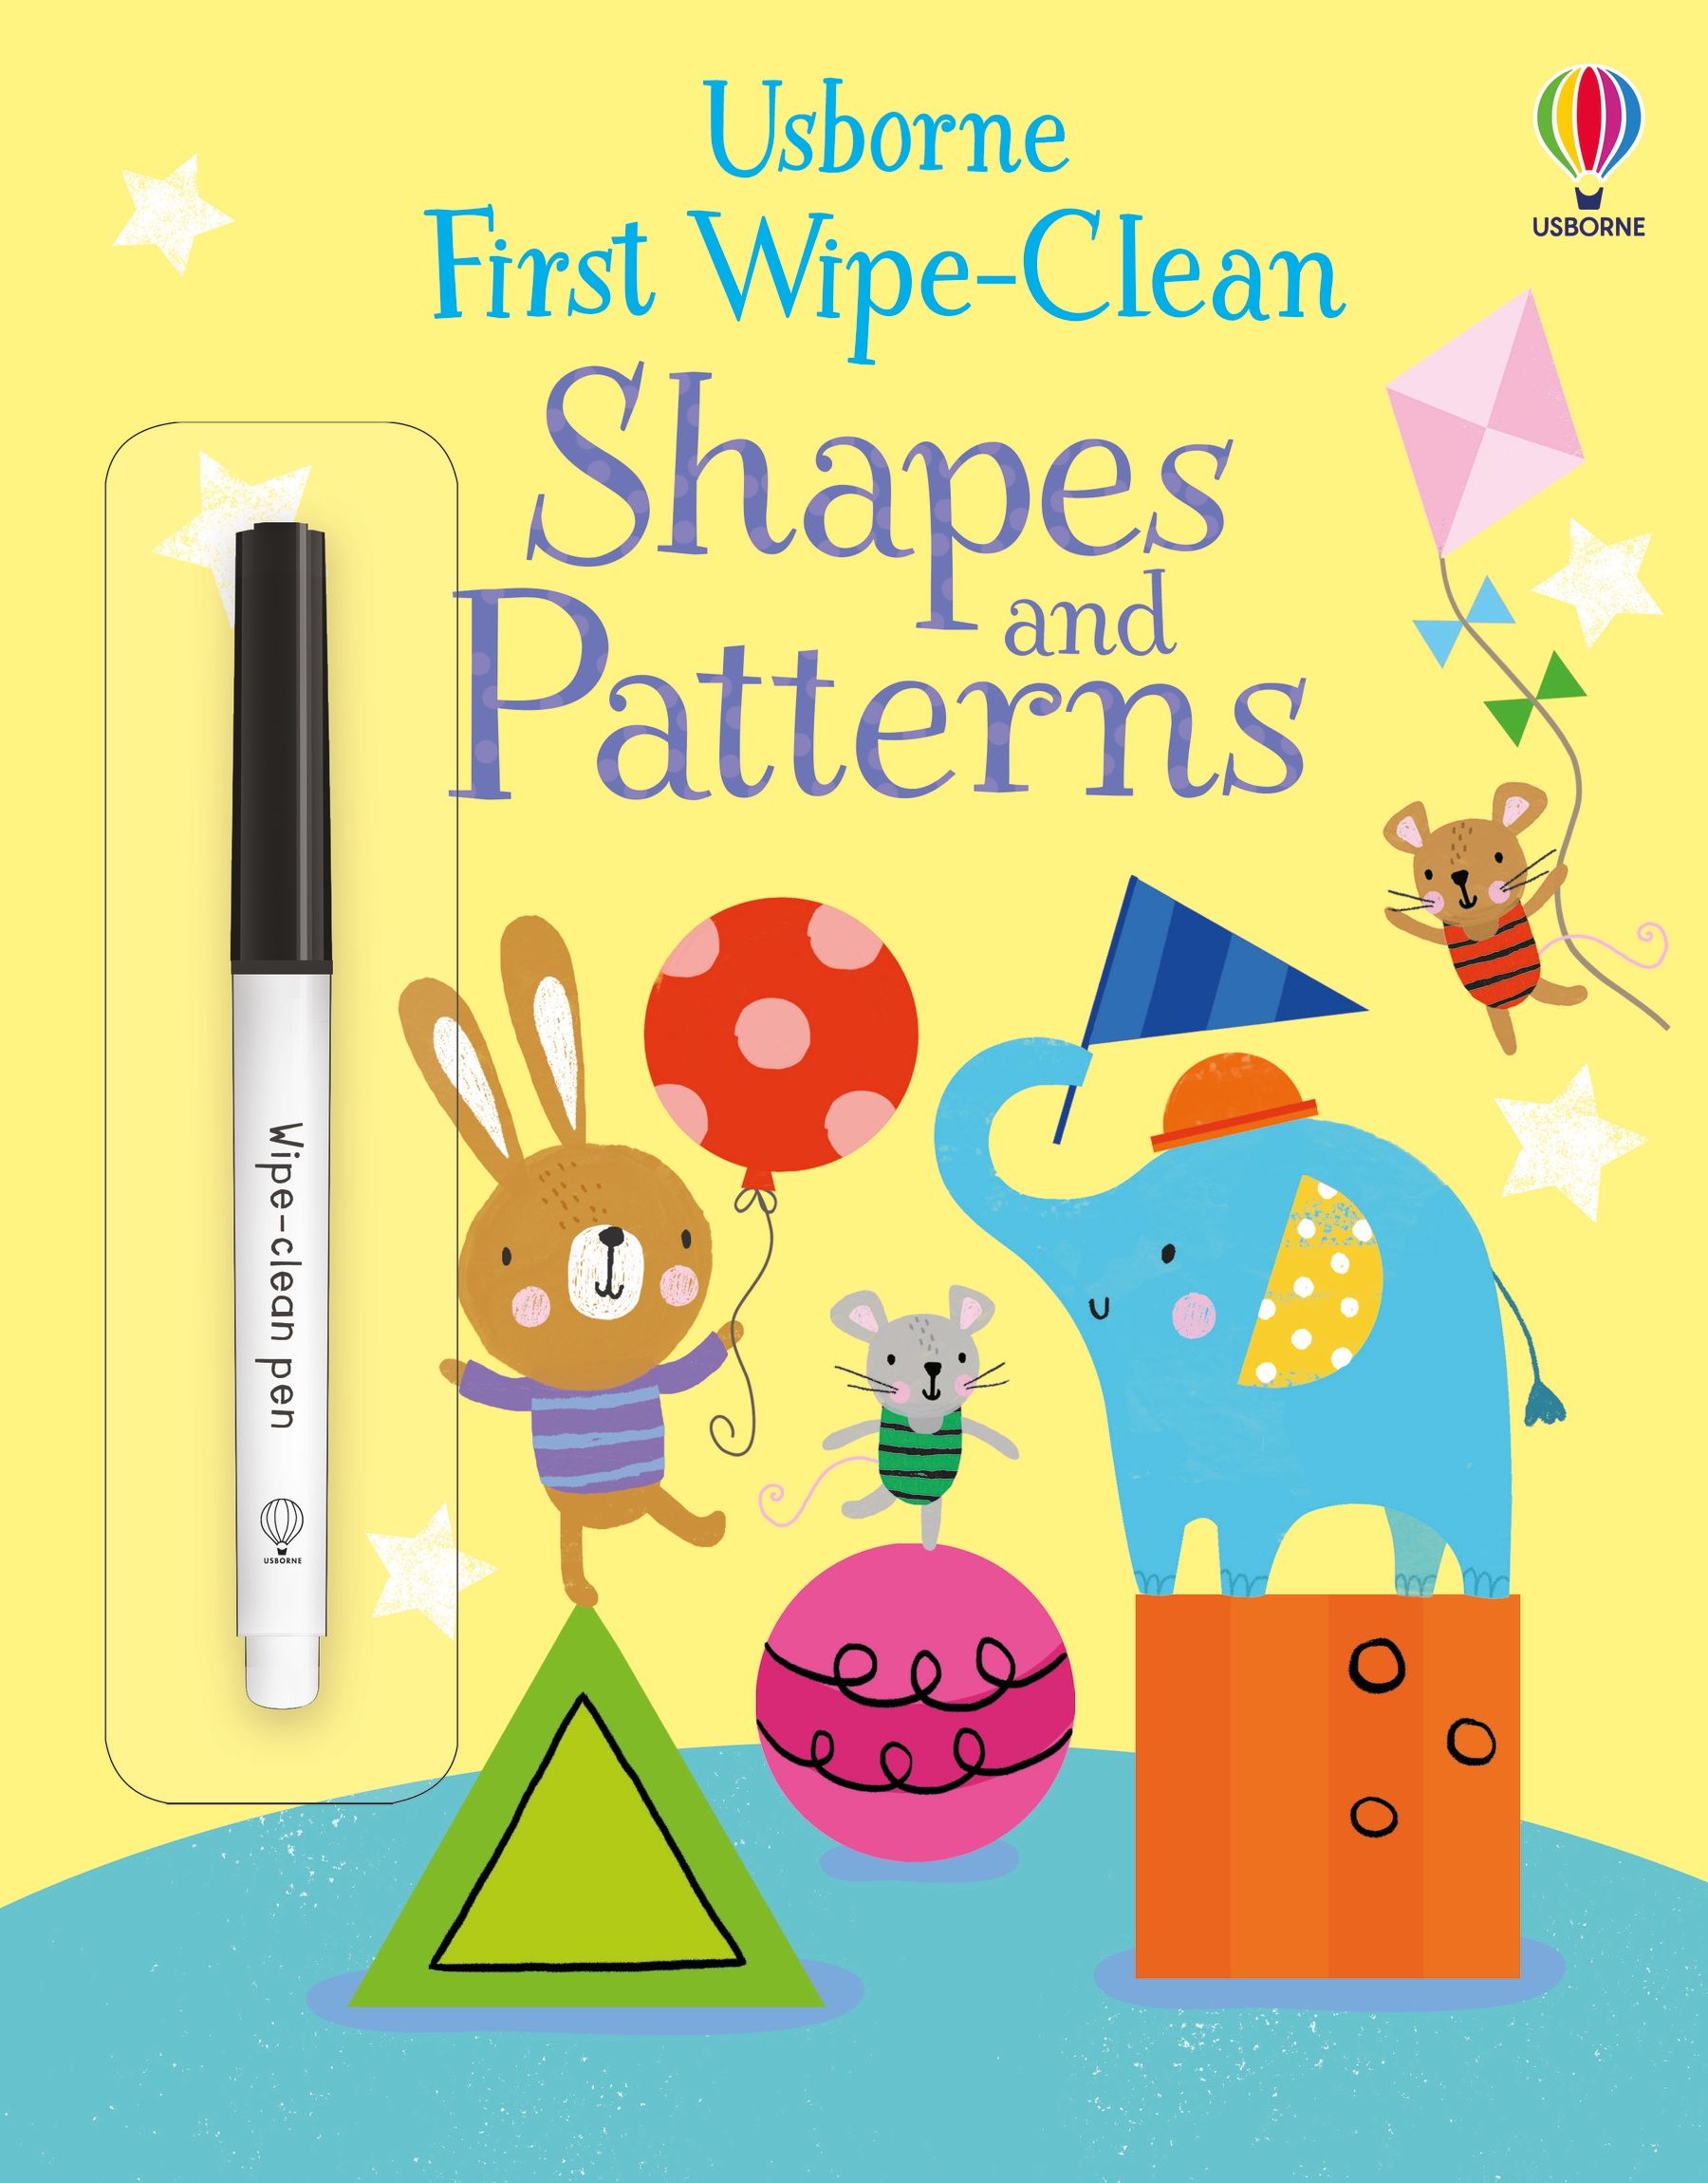 First Wipe Clean - Shapes and Patterns    